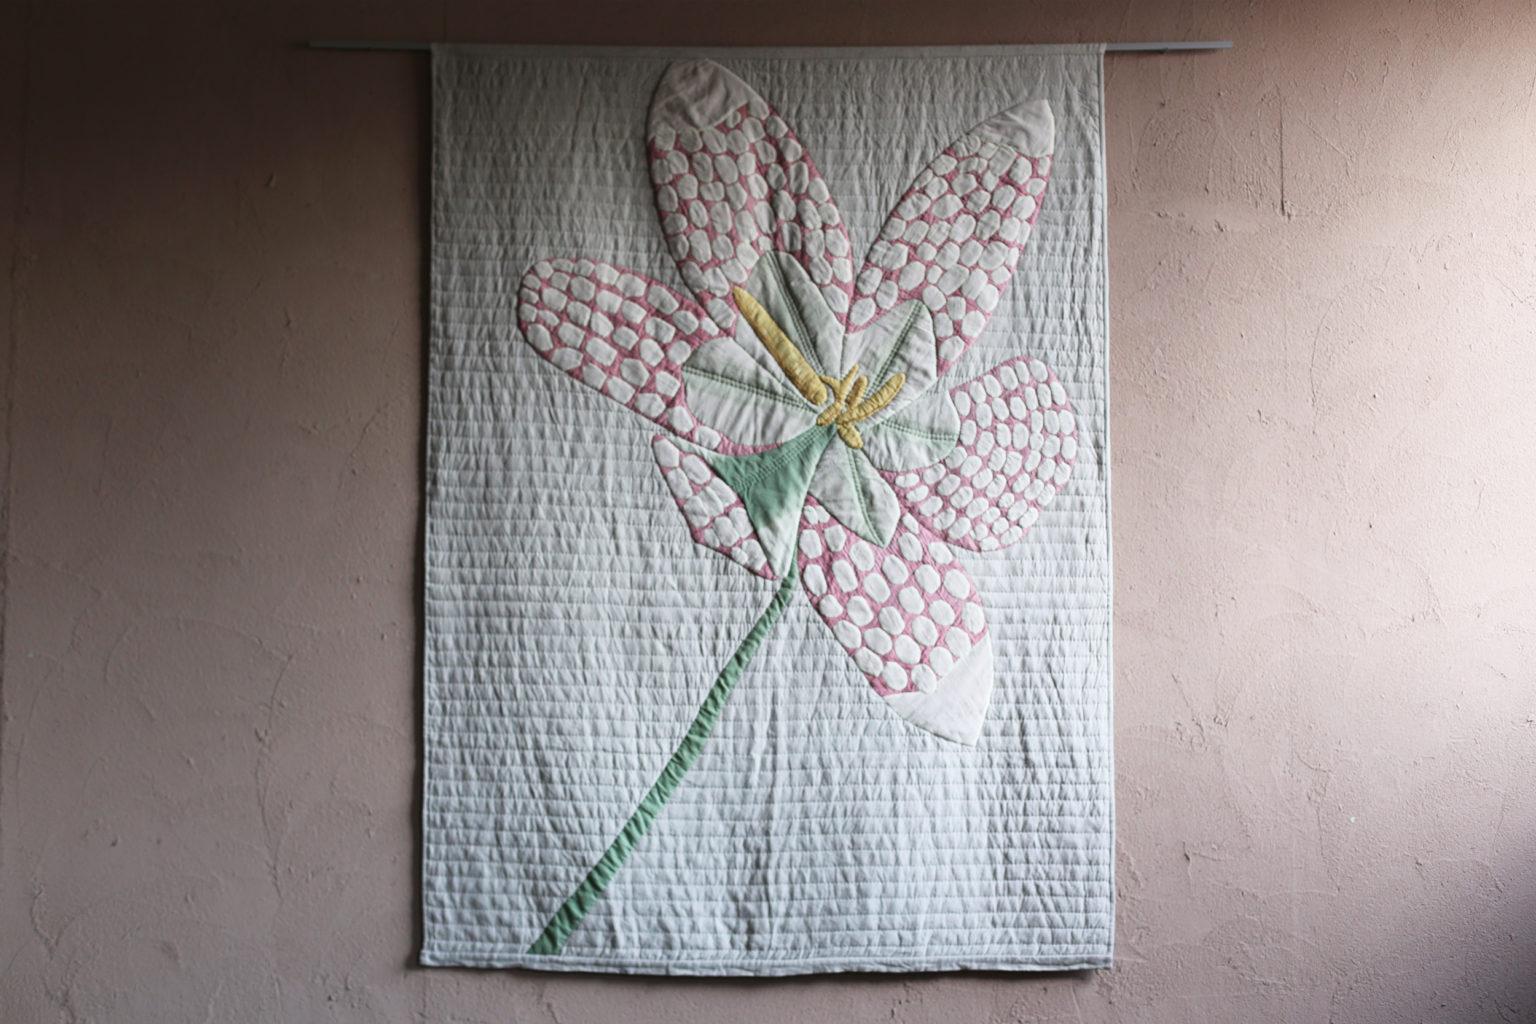 Title : Flower
Japan / 2021s 
Size : W 1970 x H 1430 mm

This quilt is made with Woven fresh linen and french linen.
Hand-quilted with cotton thread.
Hand dyed with madder, green leaf, pomegranate .


[Blue Tip atelier]
